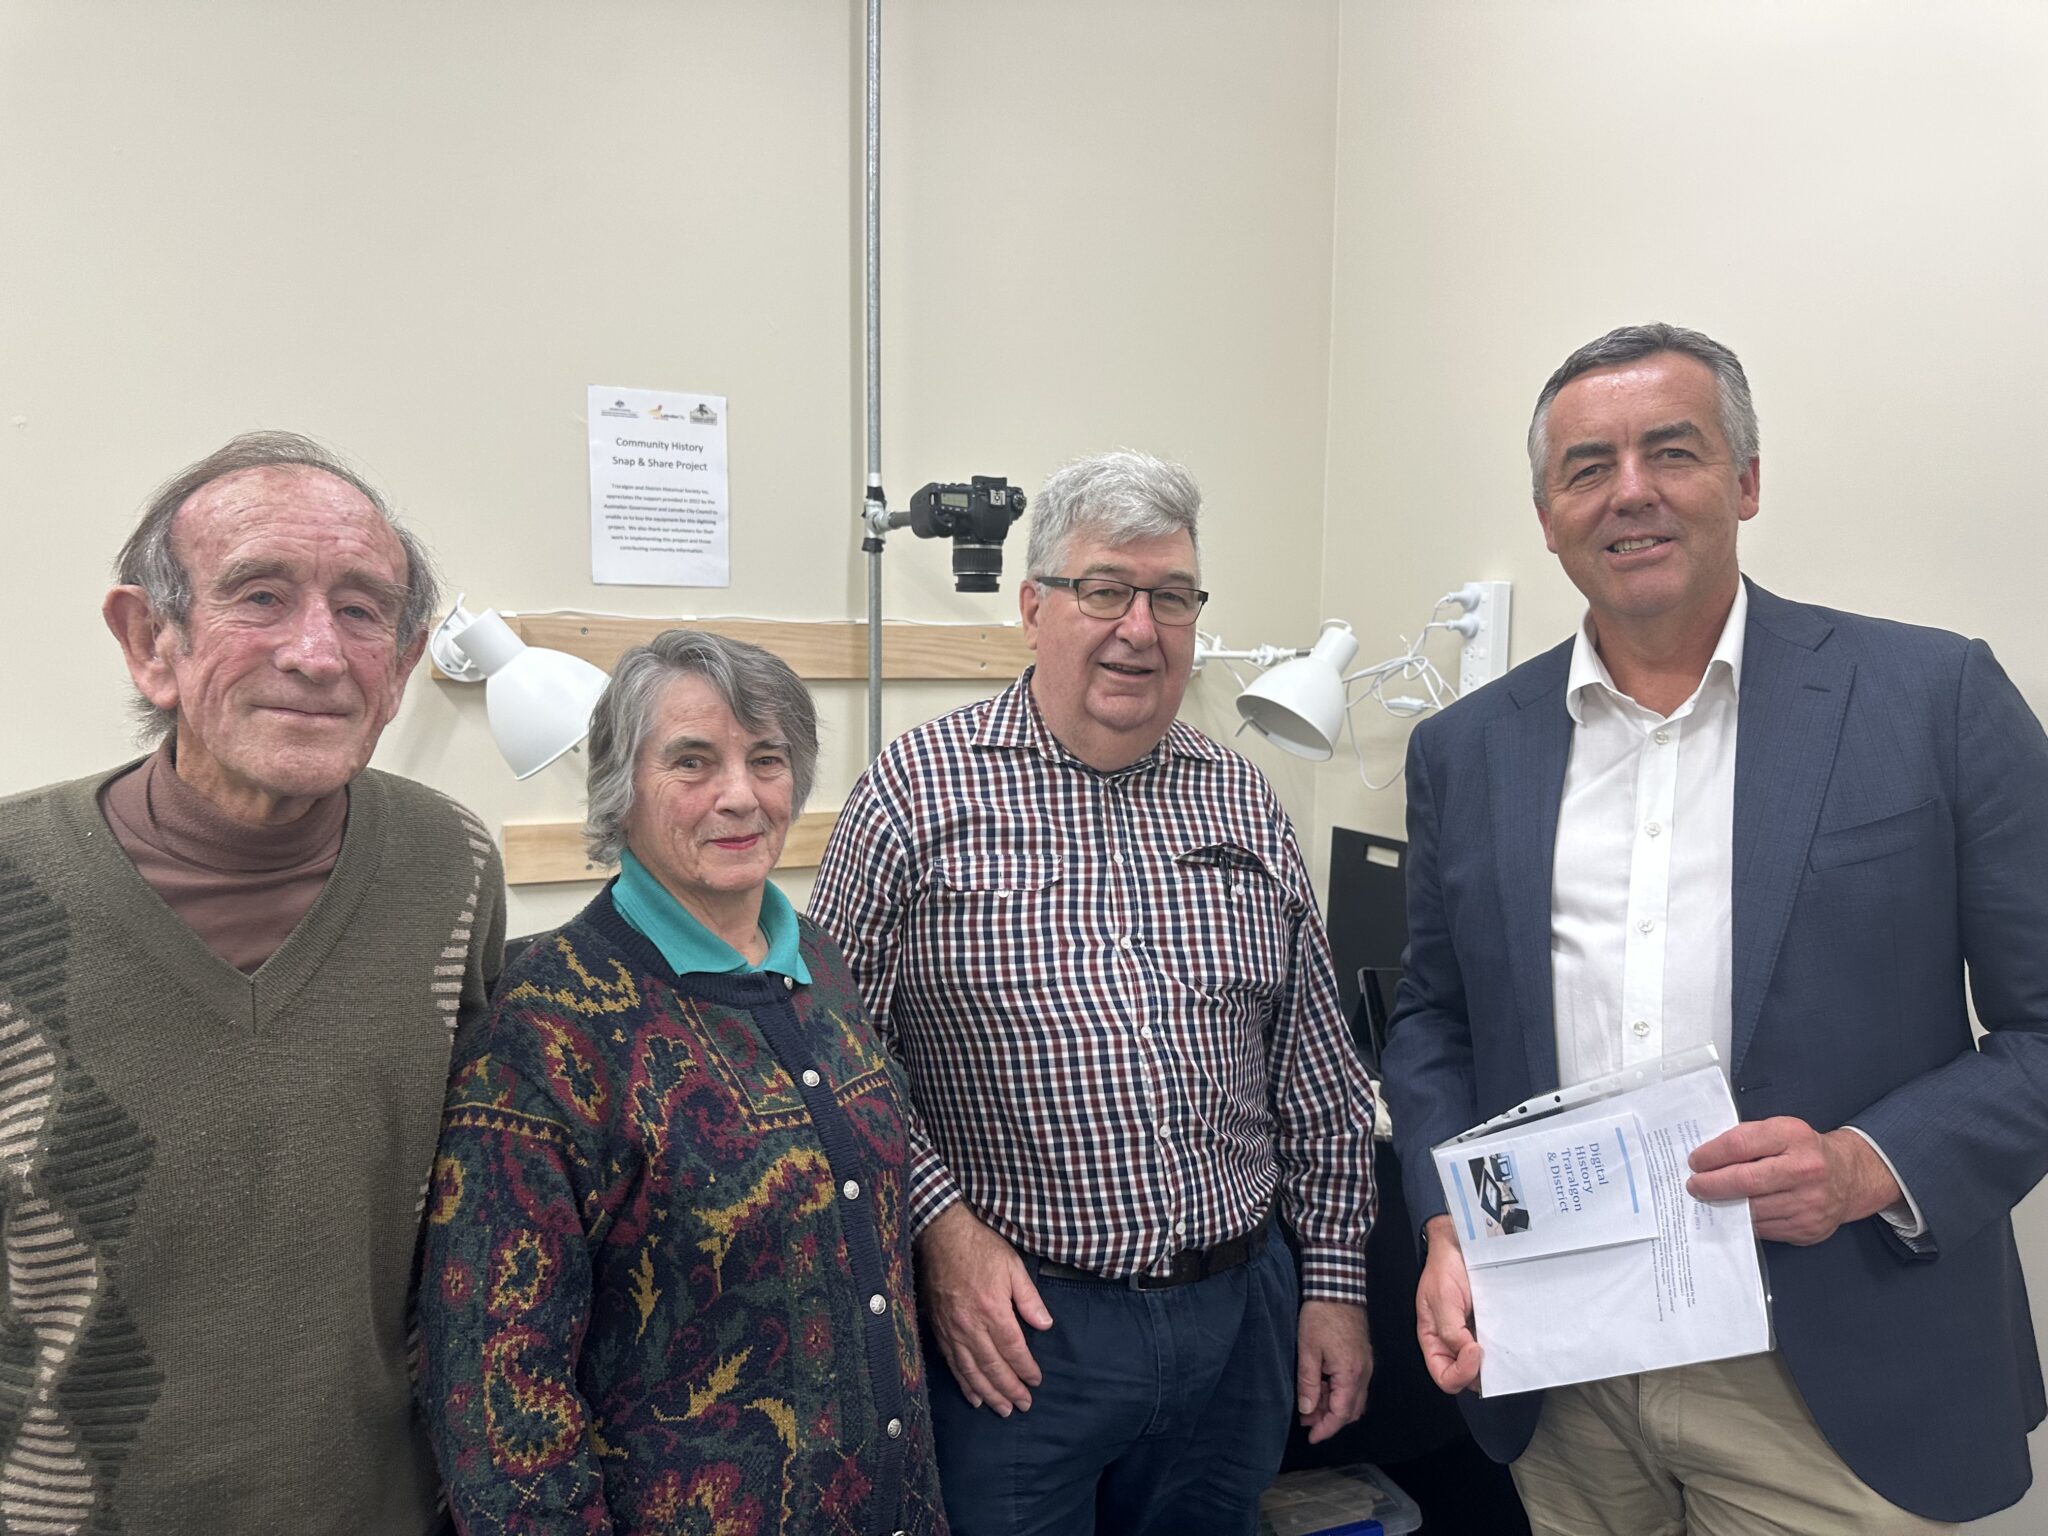 LATROBE VALLEY HISTORY TO BE SHARED